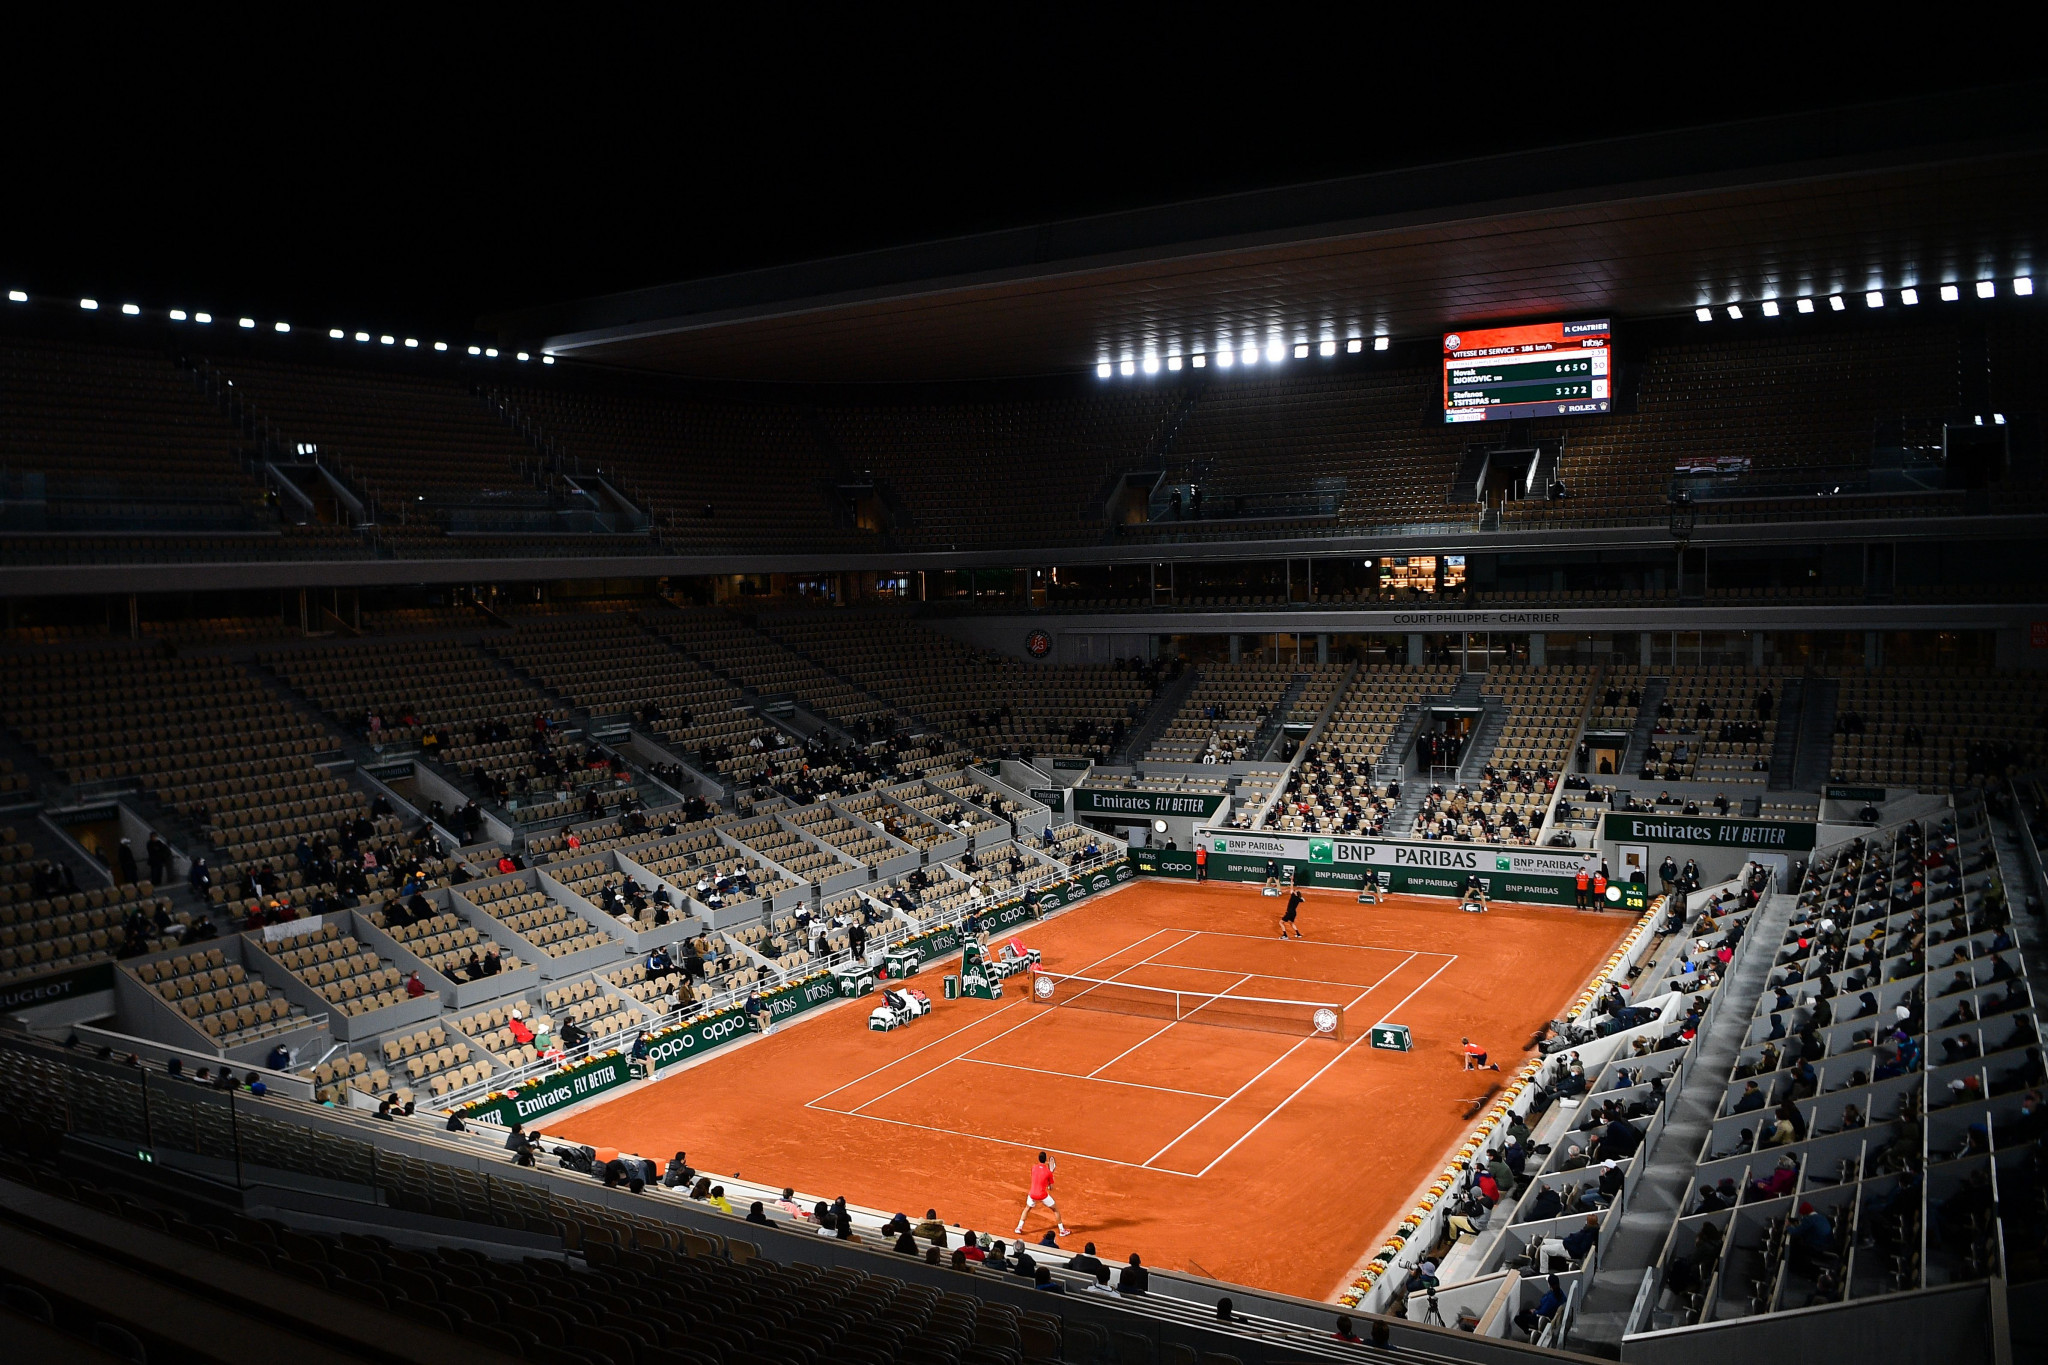 Only 1,000 spectators are permitted at Roland Garros per day due to the coronavirus pandemic ©Getty Images